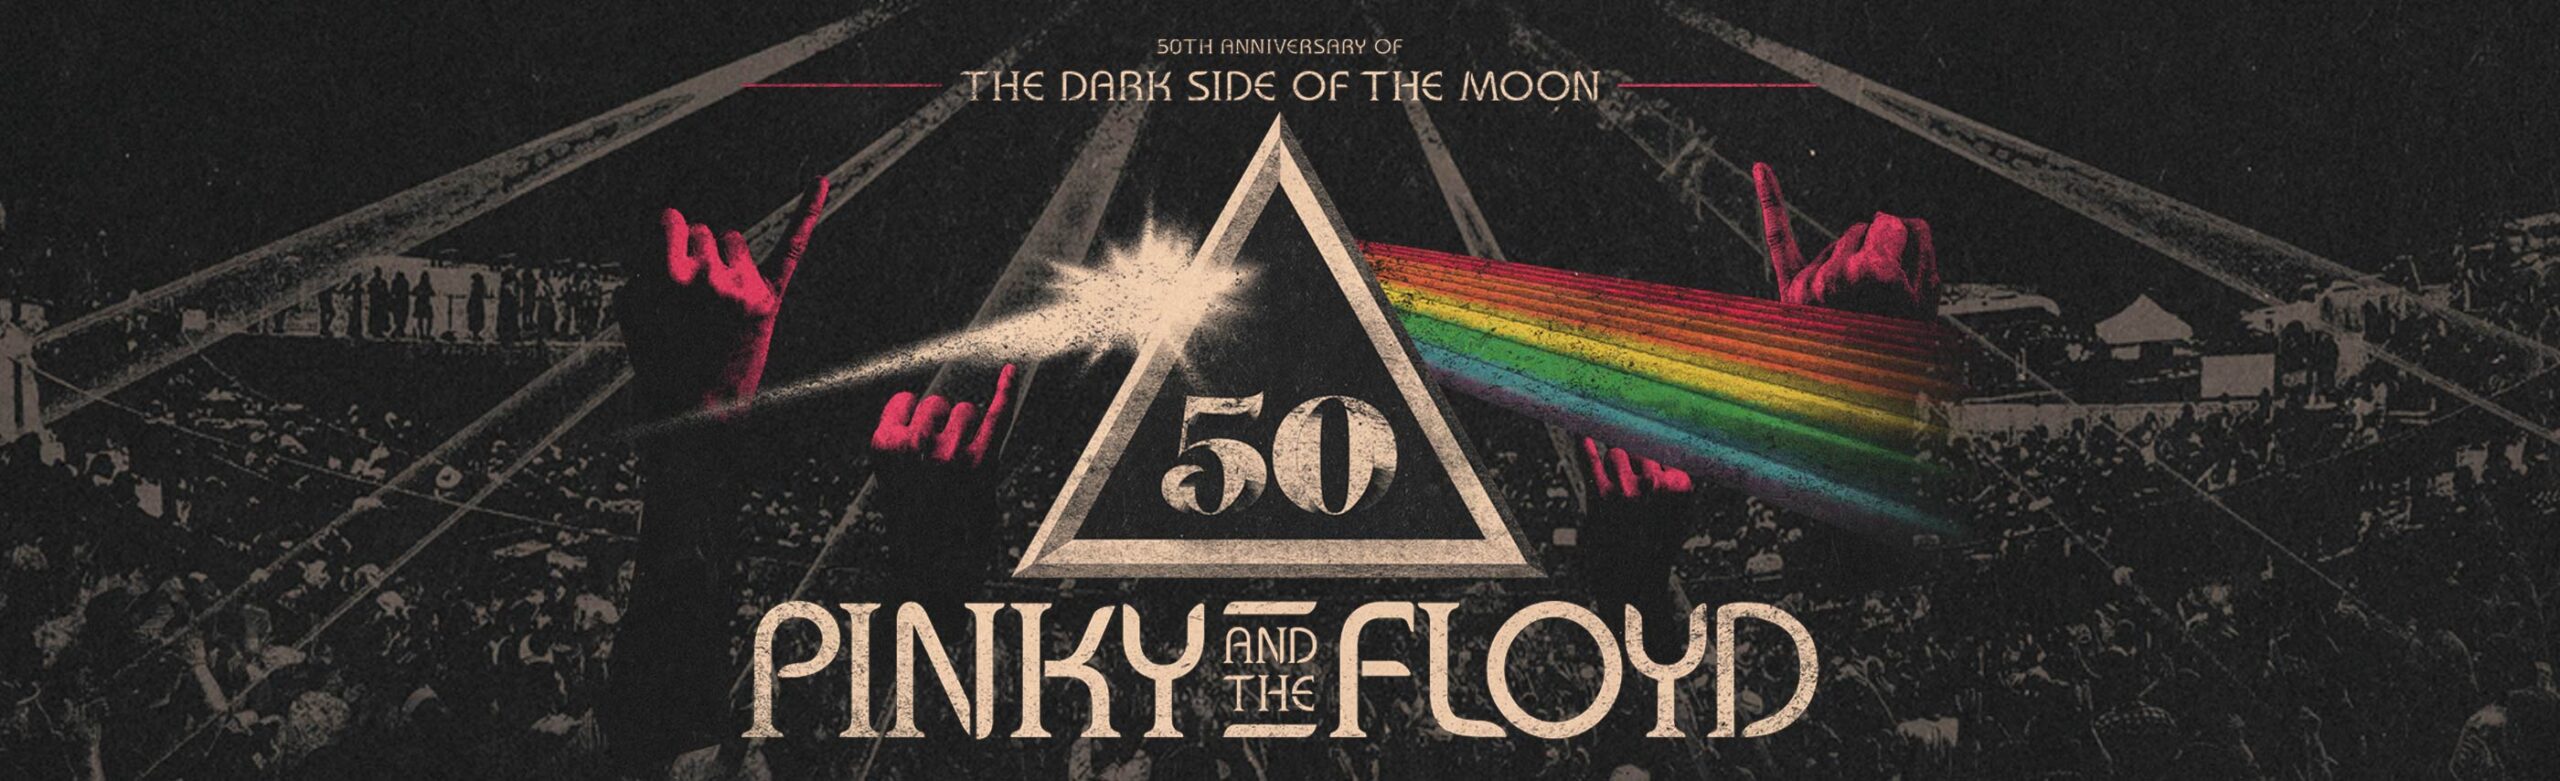 Pinky and the Floyd